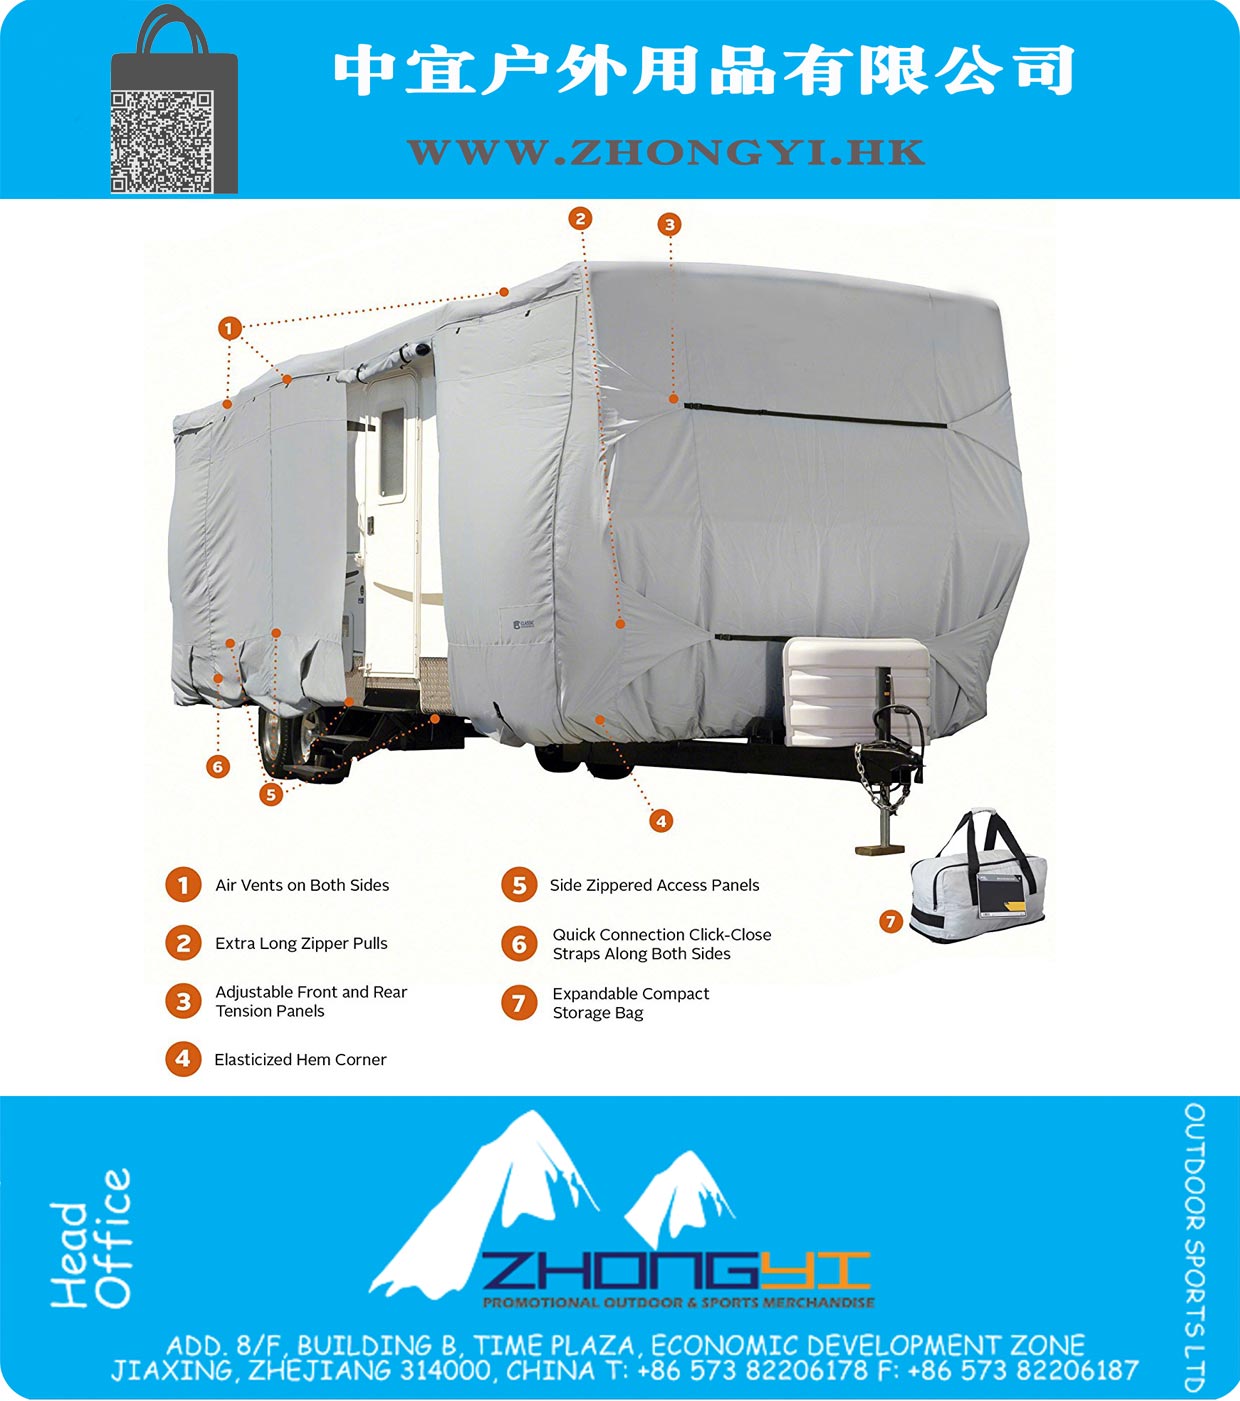 Deluxe Travel Trailer Cover